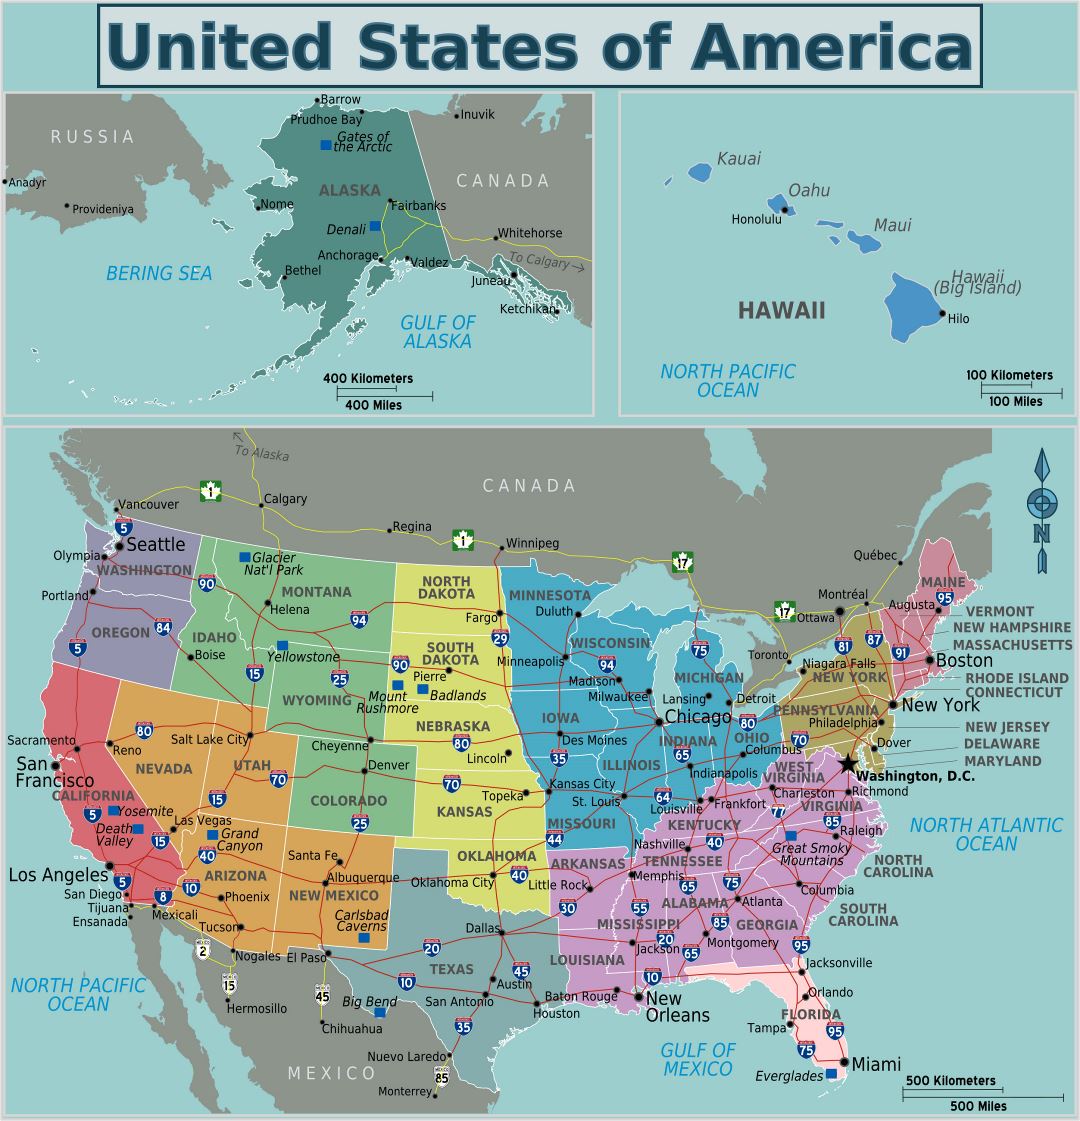 Large regions map of the USA